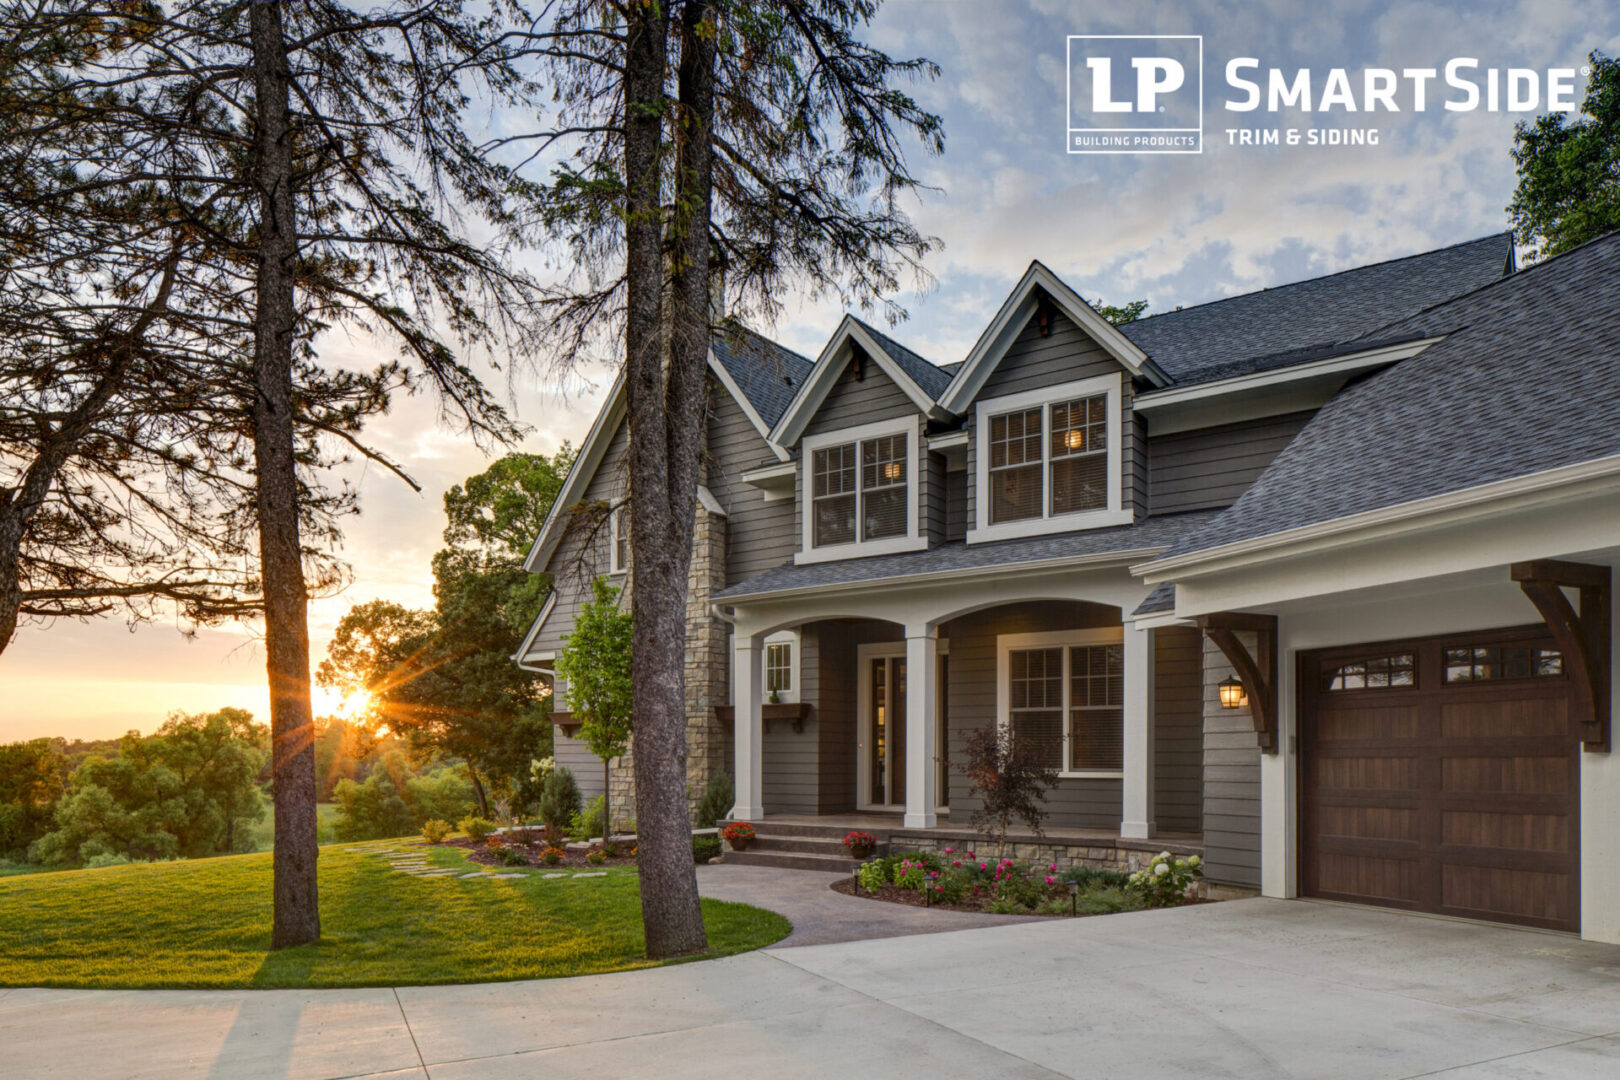 LP_Assets_HighRes High res - grey house with white trim, large fir trees, sunset - DOWNLOAD OR SHARE